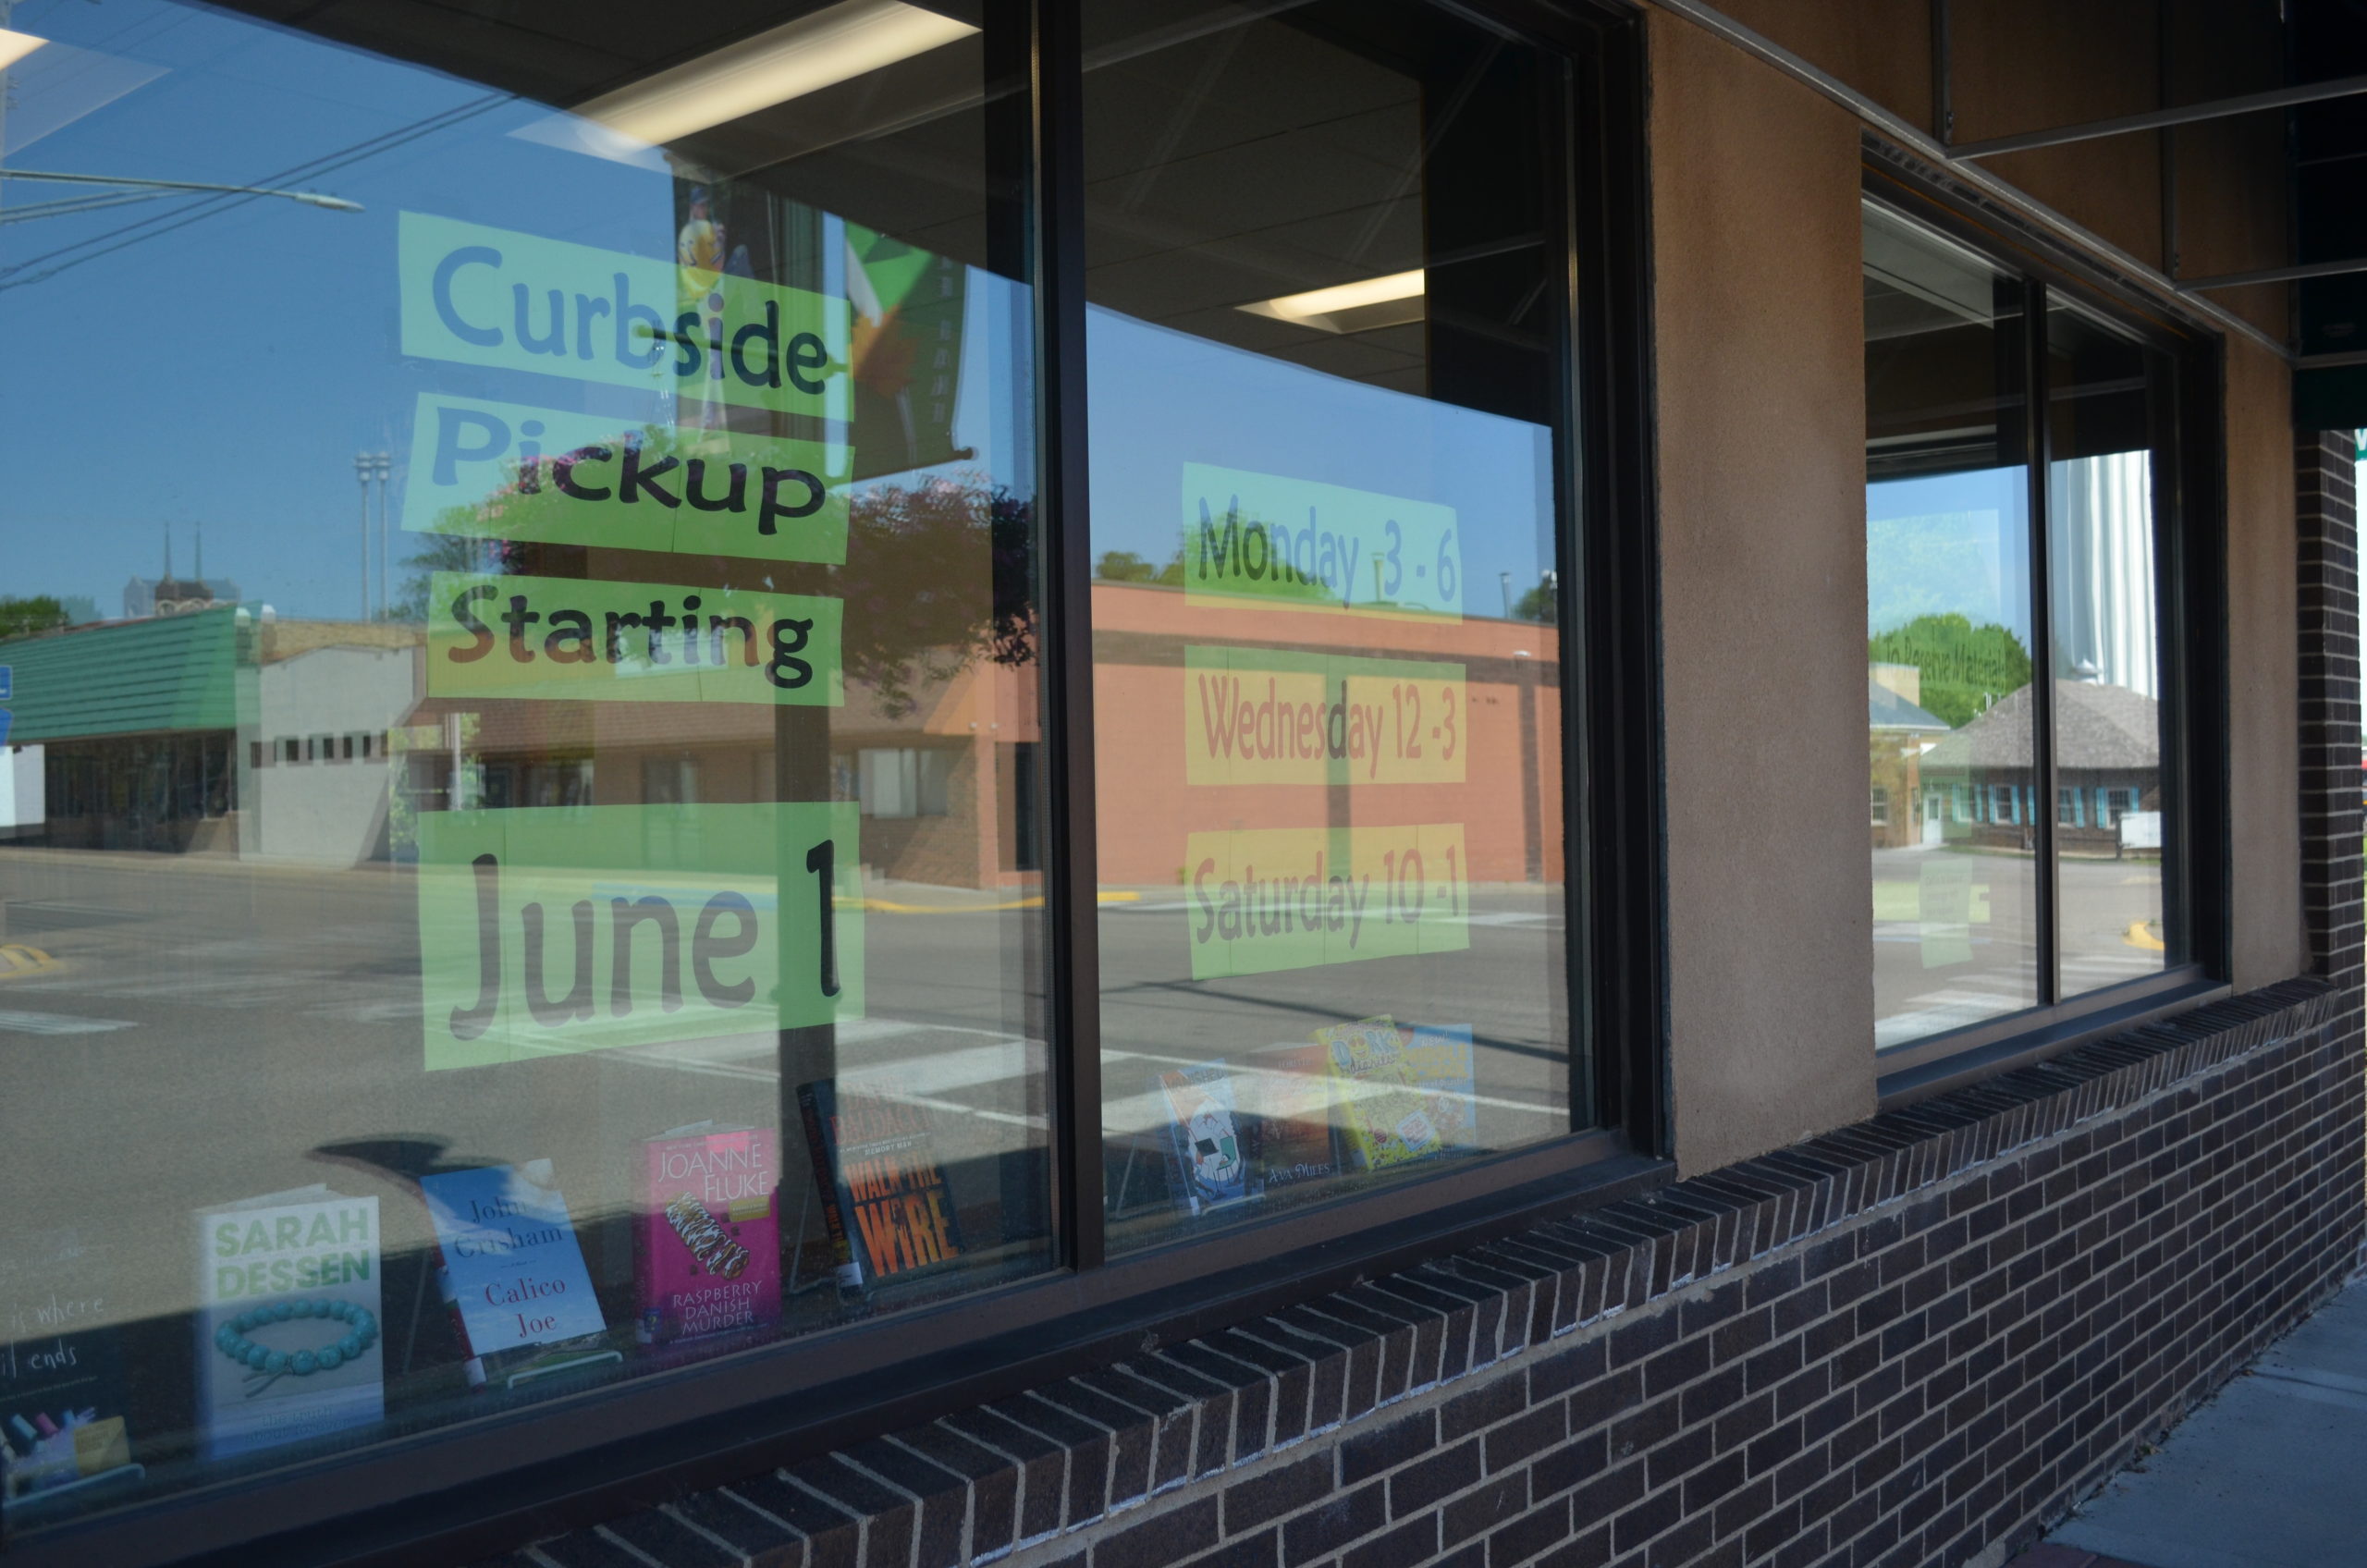 Library opens for curb side pickup | Maple Lake Messenger